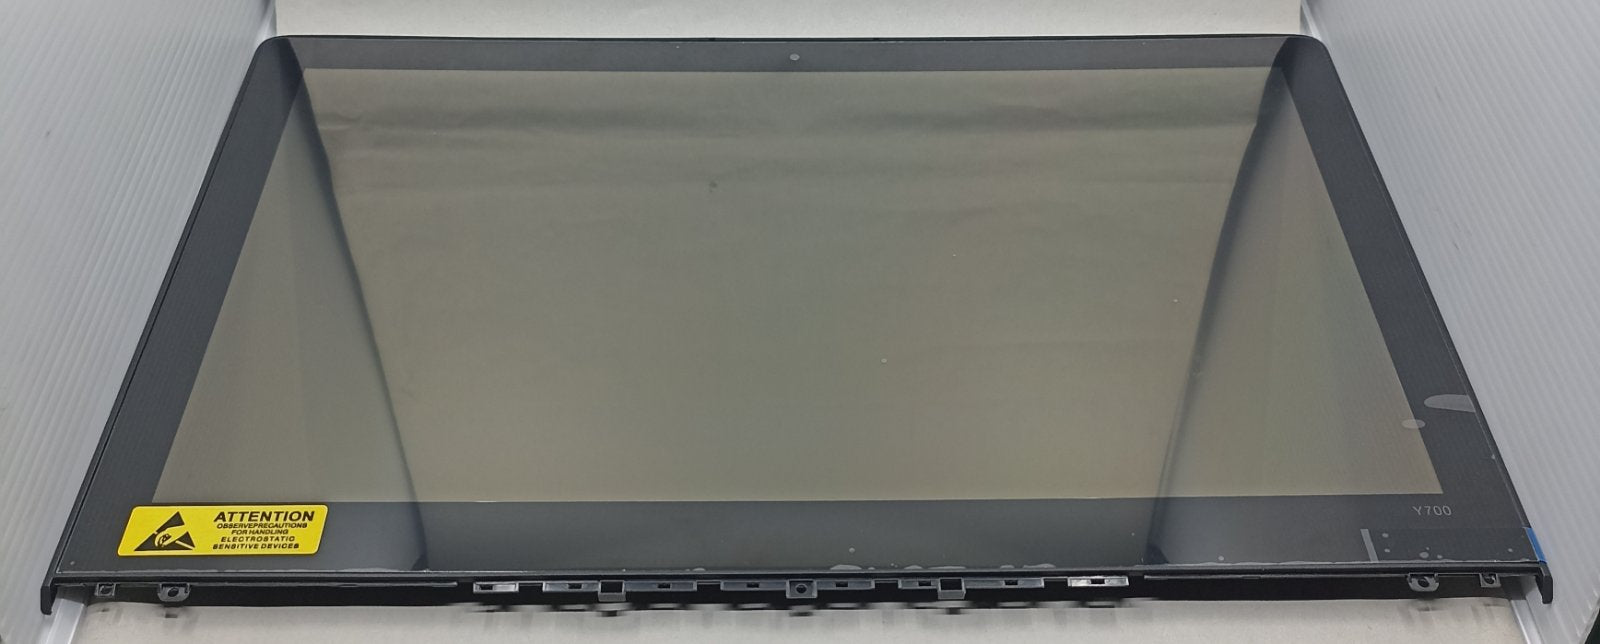 Replacement LCD For Lenovo Y700-15ISK WL